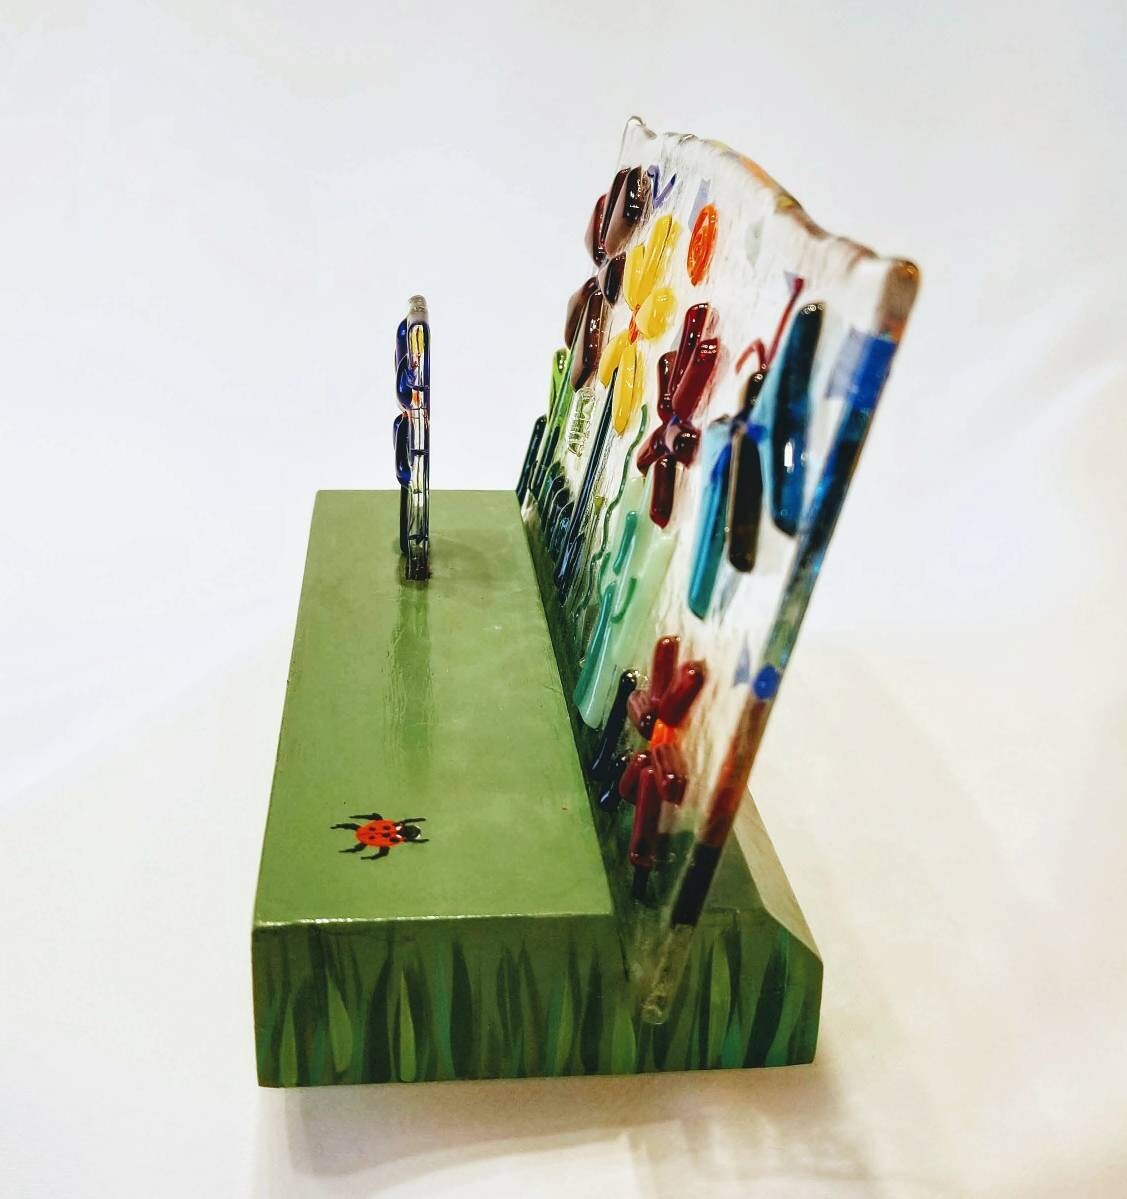 Fused Glass Flowers, 3 dimensional, Hand painted Base with Lady Bug & Green Grass. Table Top or Shelf Display. Free shipping, gift wrapped.